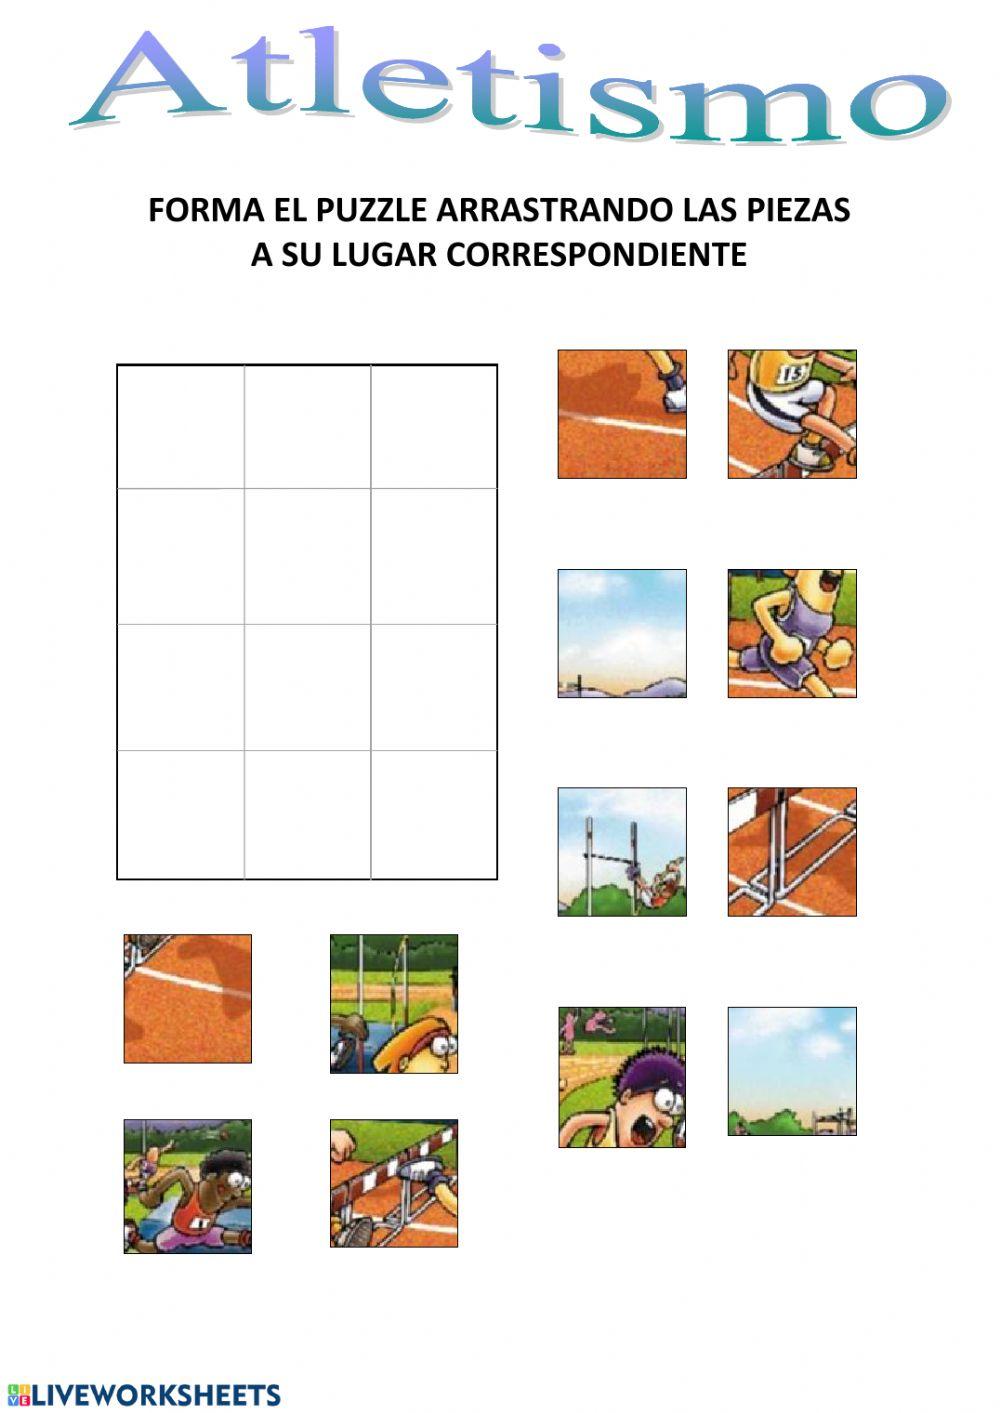 Atletismo - Puzzle (nivel 2)